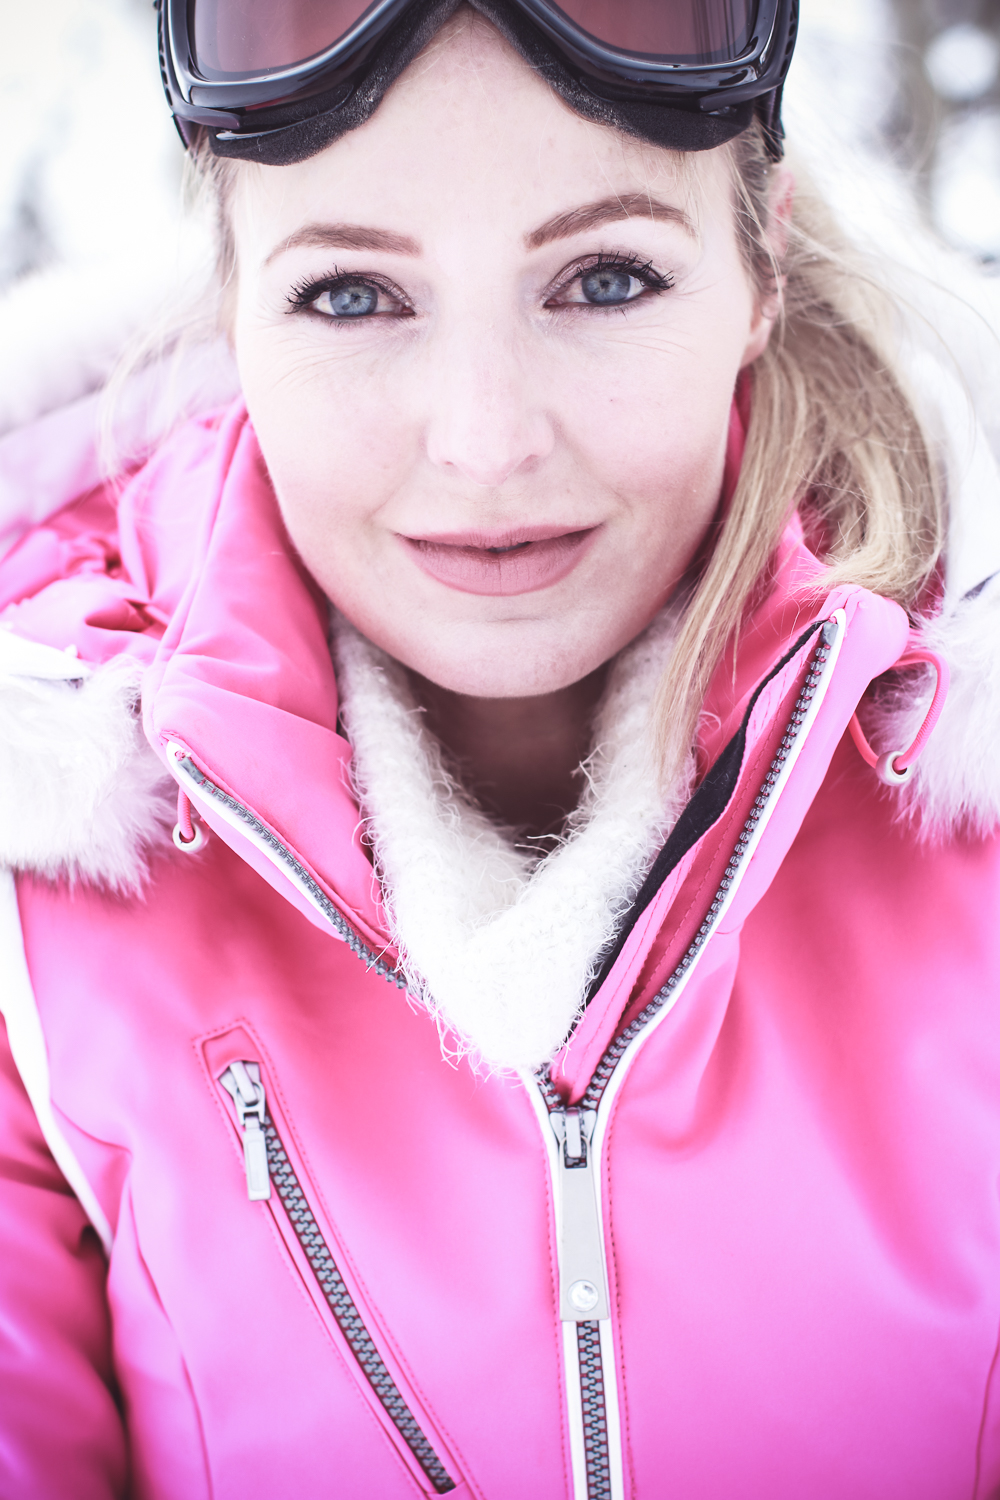 Fitness routine update, featuring lifestyle blogger over 40, Erin Busbee of Busbee Style, talking about skiing as great cardio wearing Nils US pink ski jacket, and Toni Sailer white ski pants